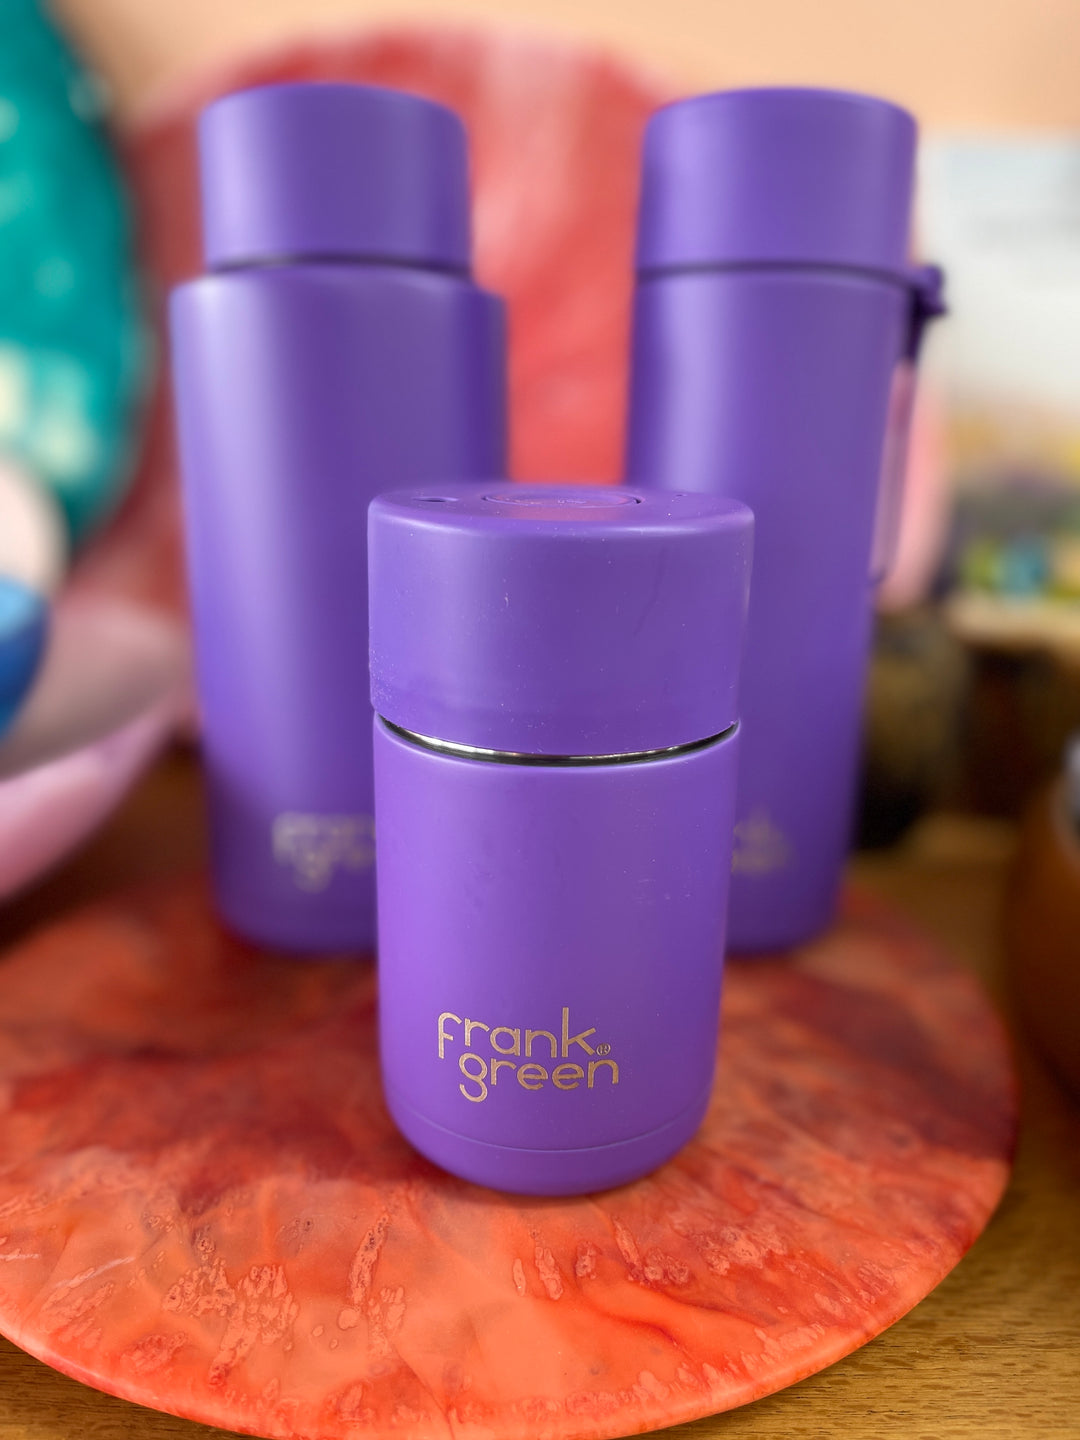 frank green Limited Edition Cosmic Purple Ceramic Reusable Cup - 10oz / 295ml